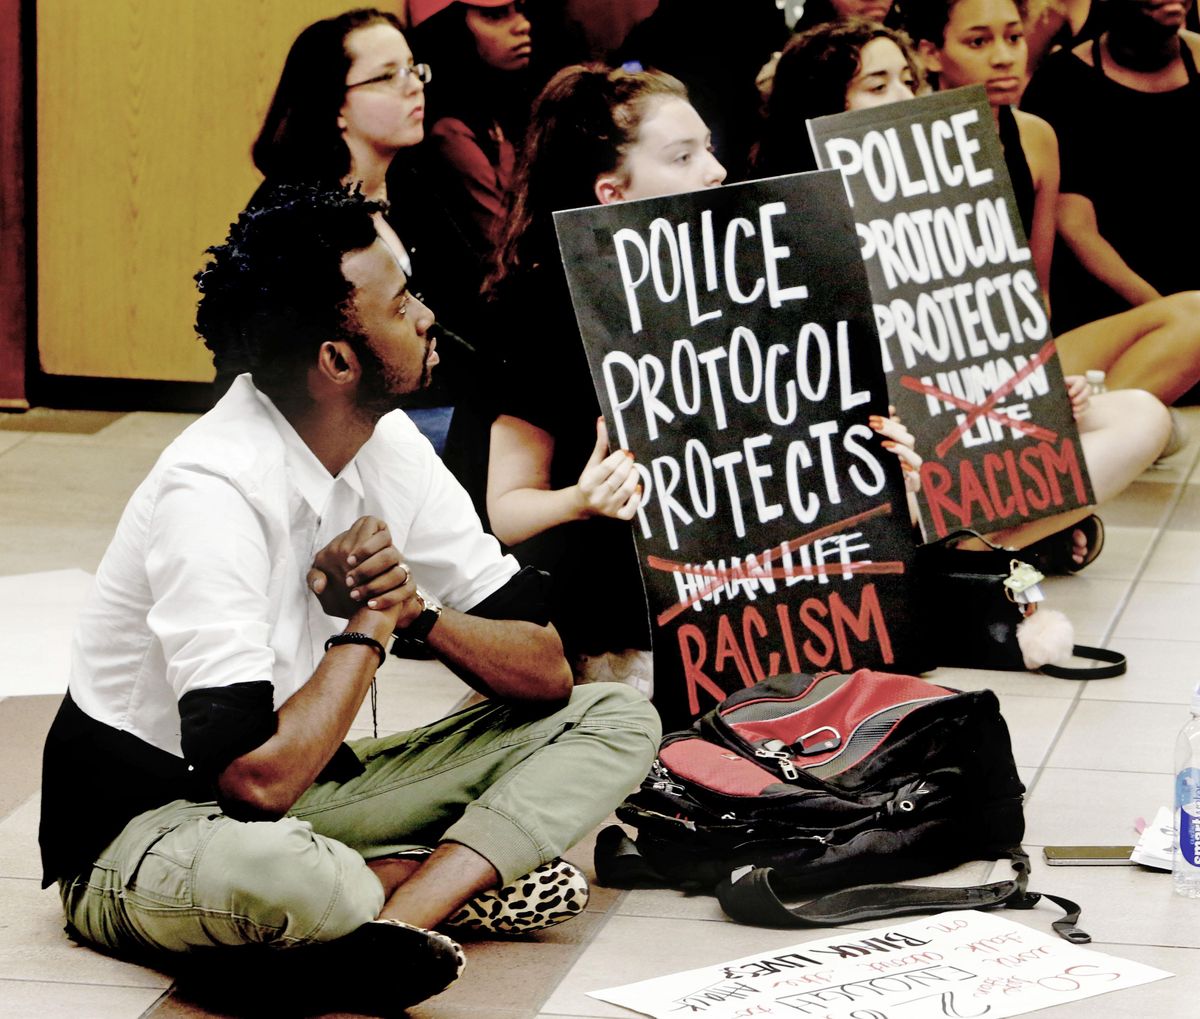 Protesters fill the food court chanting “Black Lives Matter” in the Oklahoma Memorial Union at the University of Oklahoma on Thursday, Sept. 22, 2016 in Norman, Okla. Prosecutors in Tulsa, Oklahoma, charged a white police officer who fatally shot an unarmed black man on a city street with first-degree manslaughter Thursday. (Steve Sisney / Oklahoman via AP)